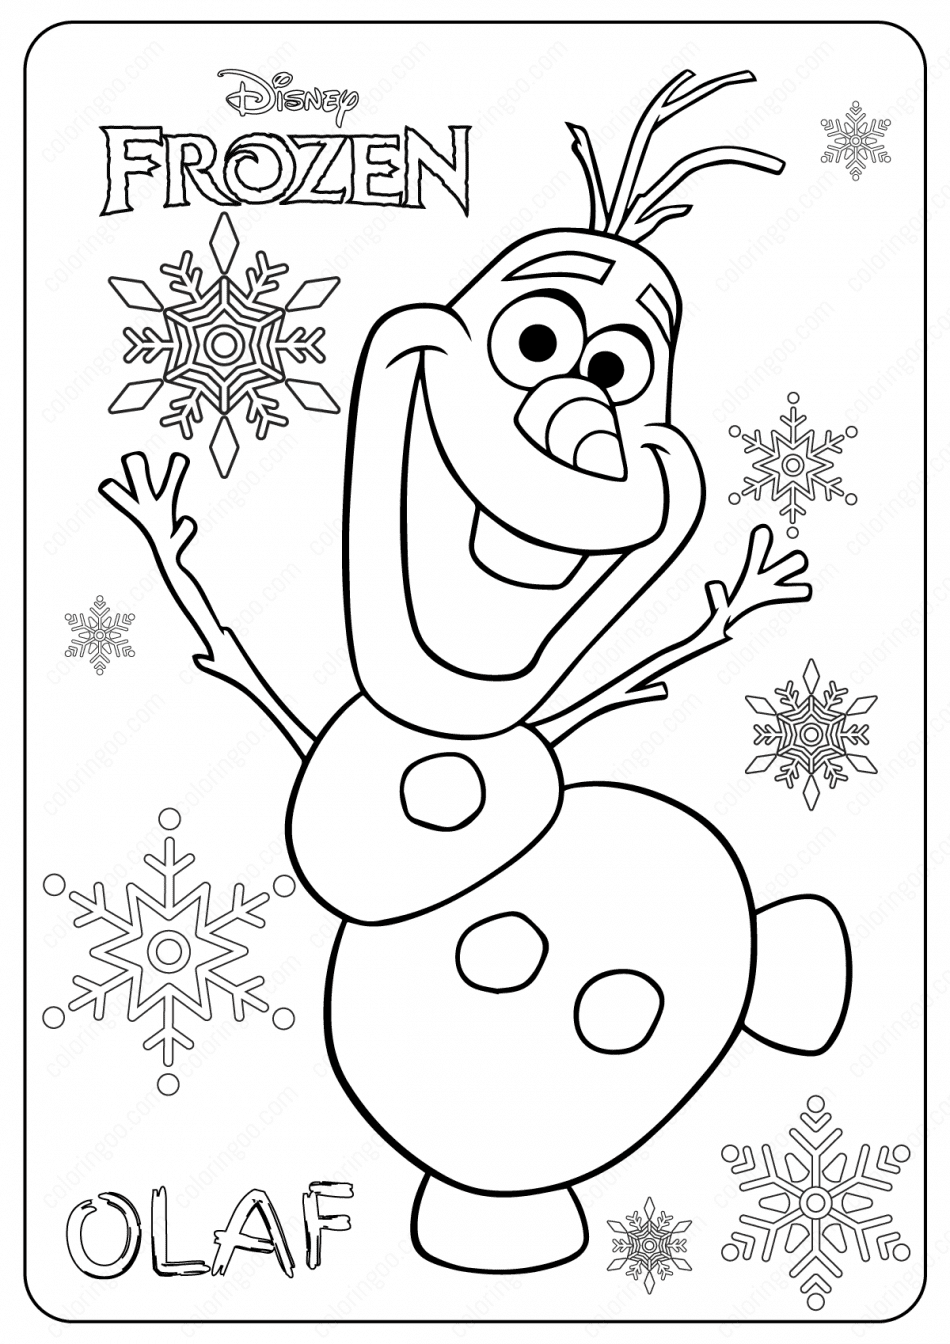 Free Printable Frozen Olaf Coloring Pages